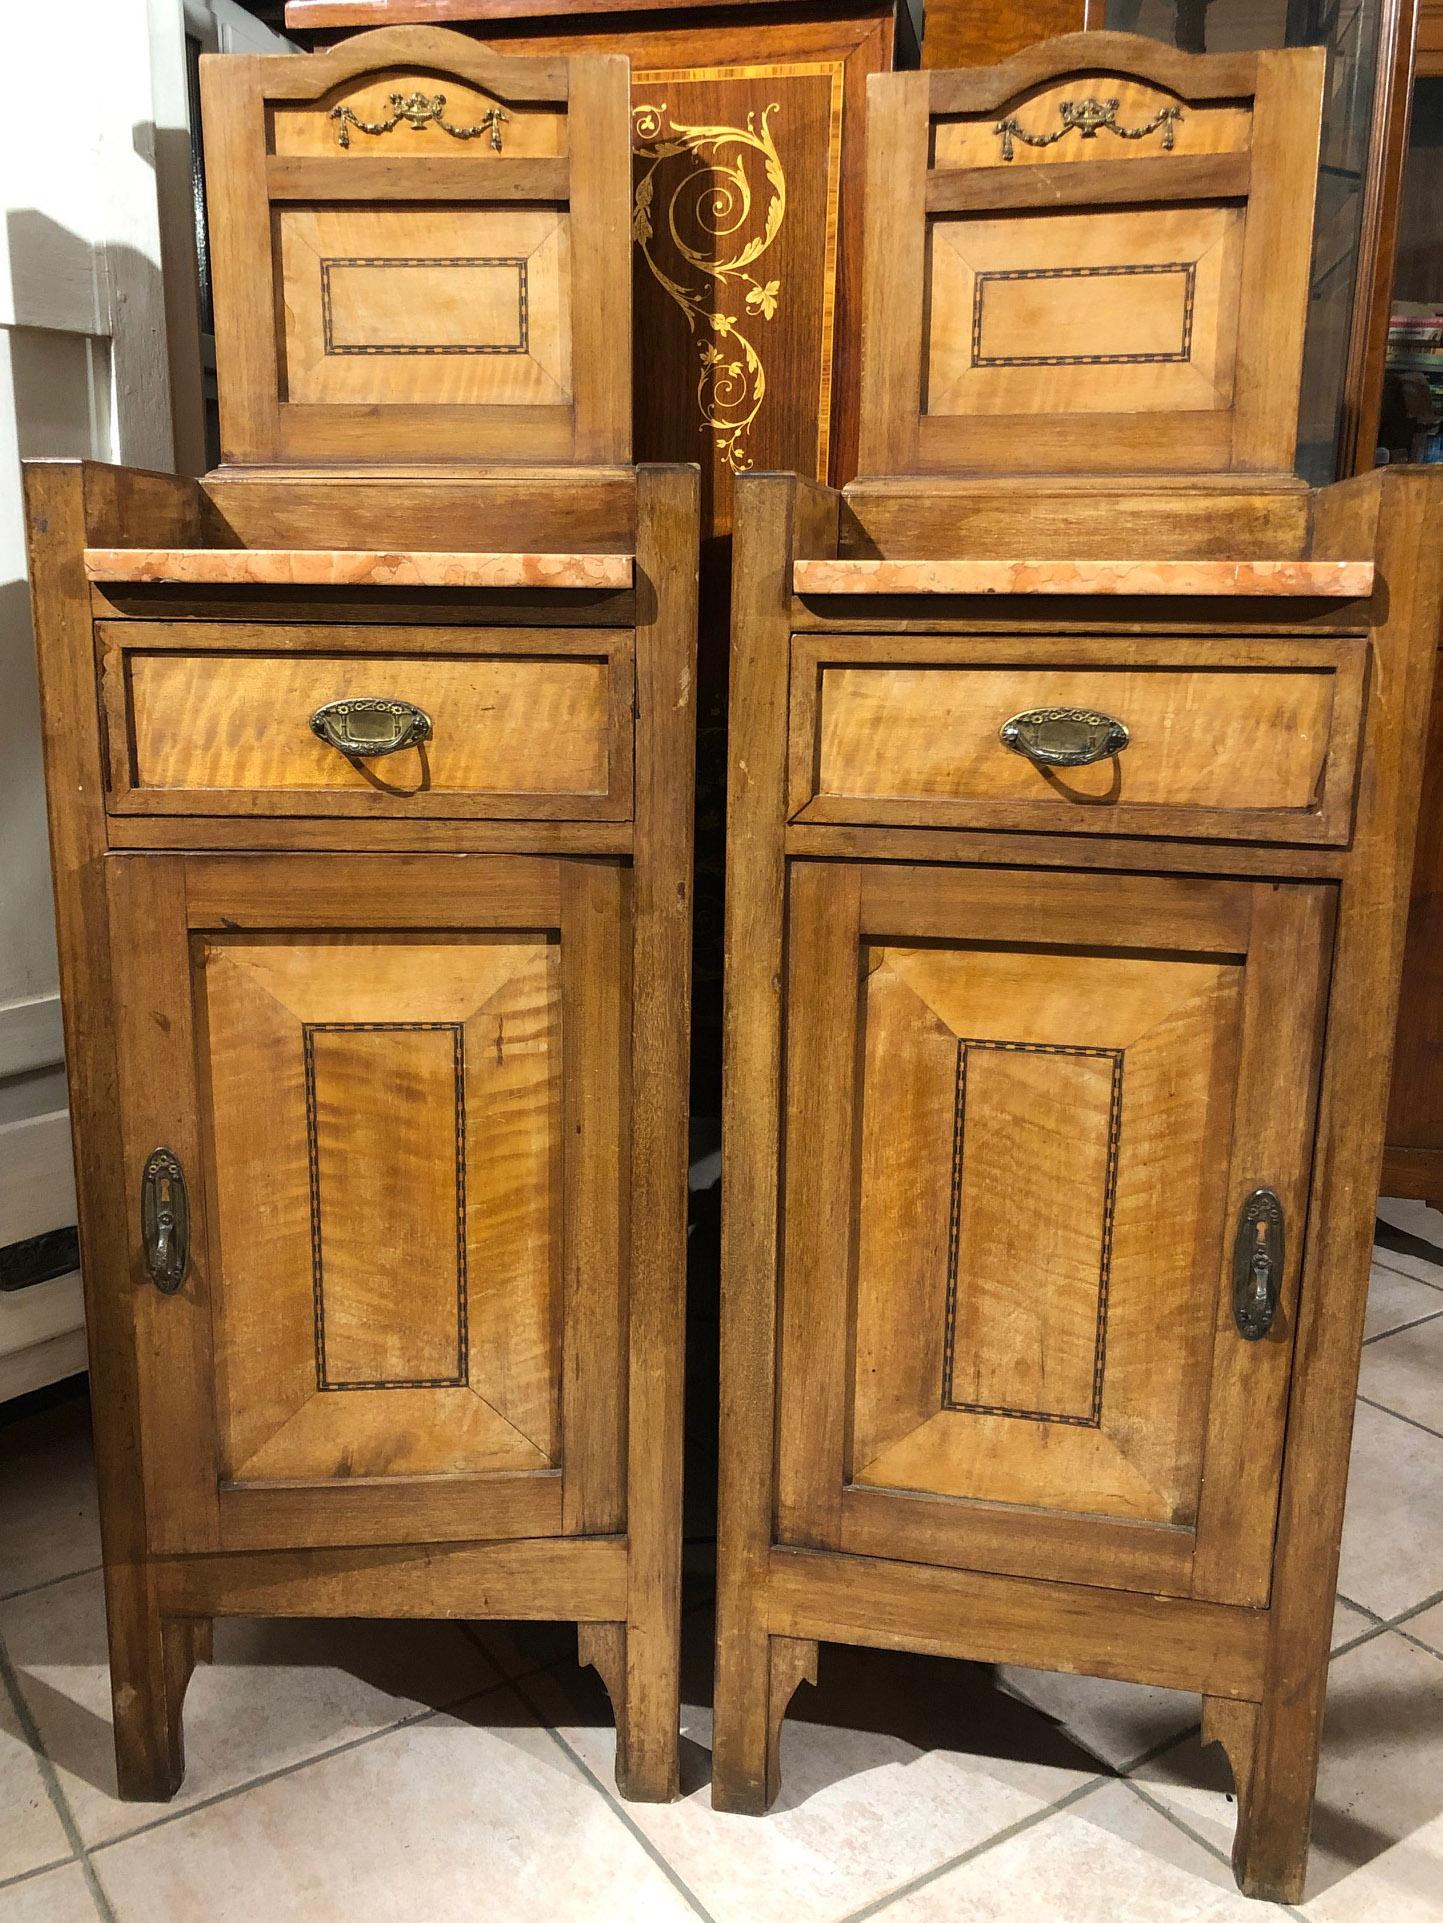 Pair of original Tuscan walnut nightstands with drawer and pink marble.
Size cm: 41 x 29 x 95/125 H
Period: 1930.
They will be delivered in a specific wooden case for export, packed in bubble wrap.
Comes from an old country house in the Pisa area of